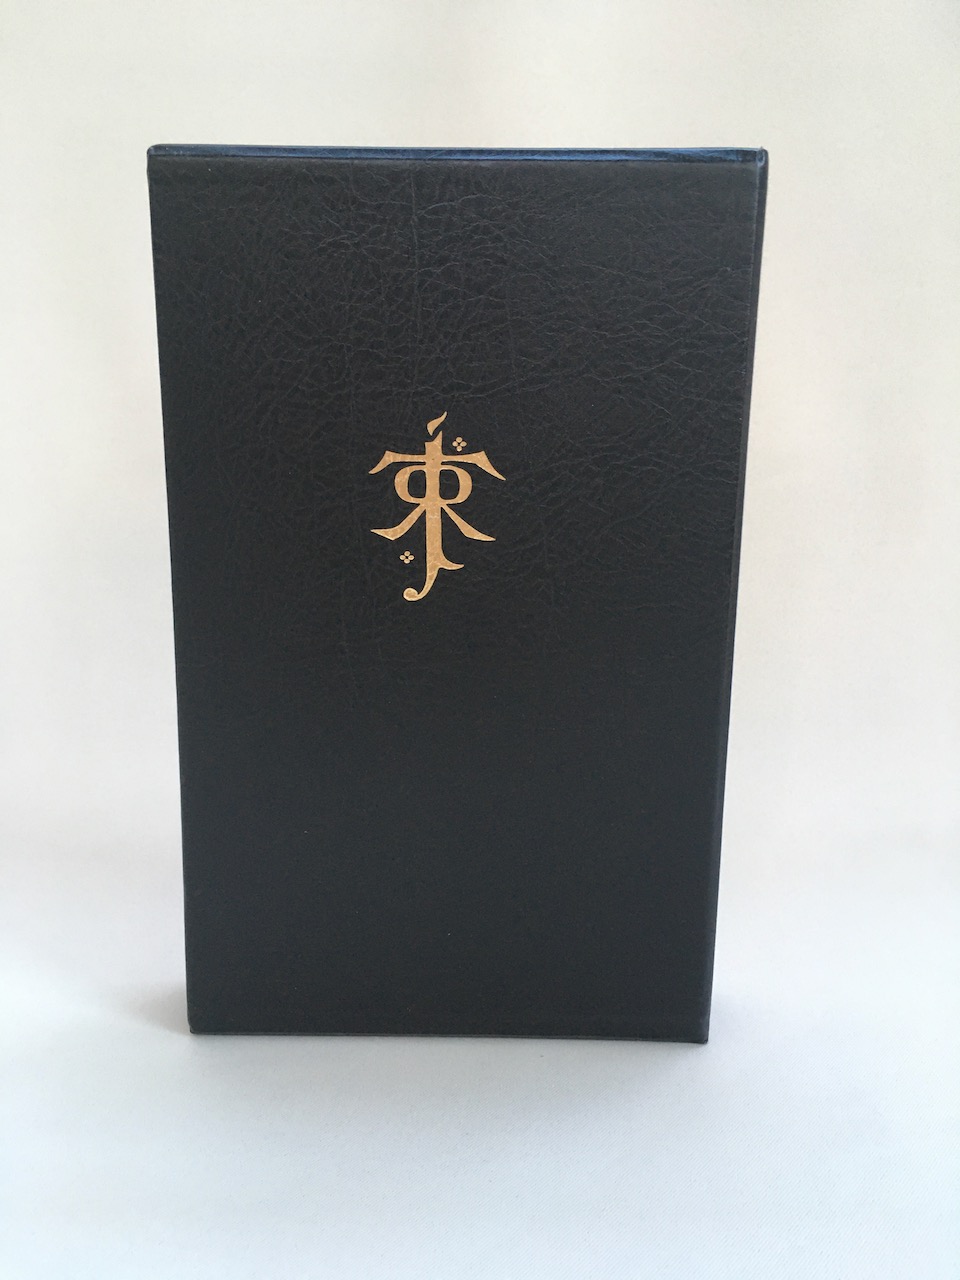 Lord of the Rings, Harper Collins Deluxe Limited Edition of 2001 - Black Leather 3